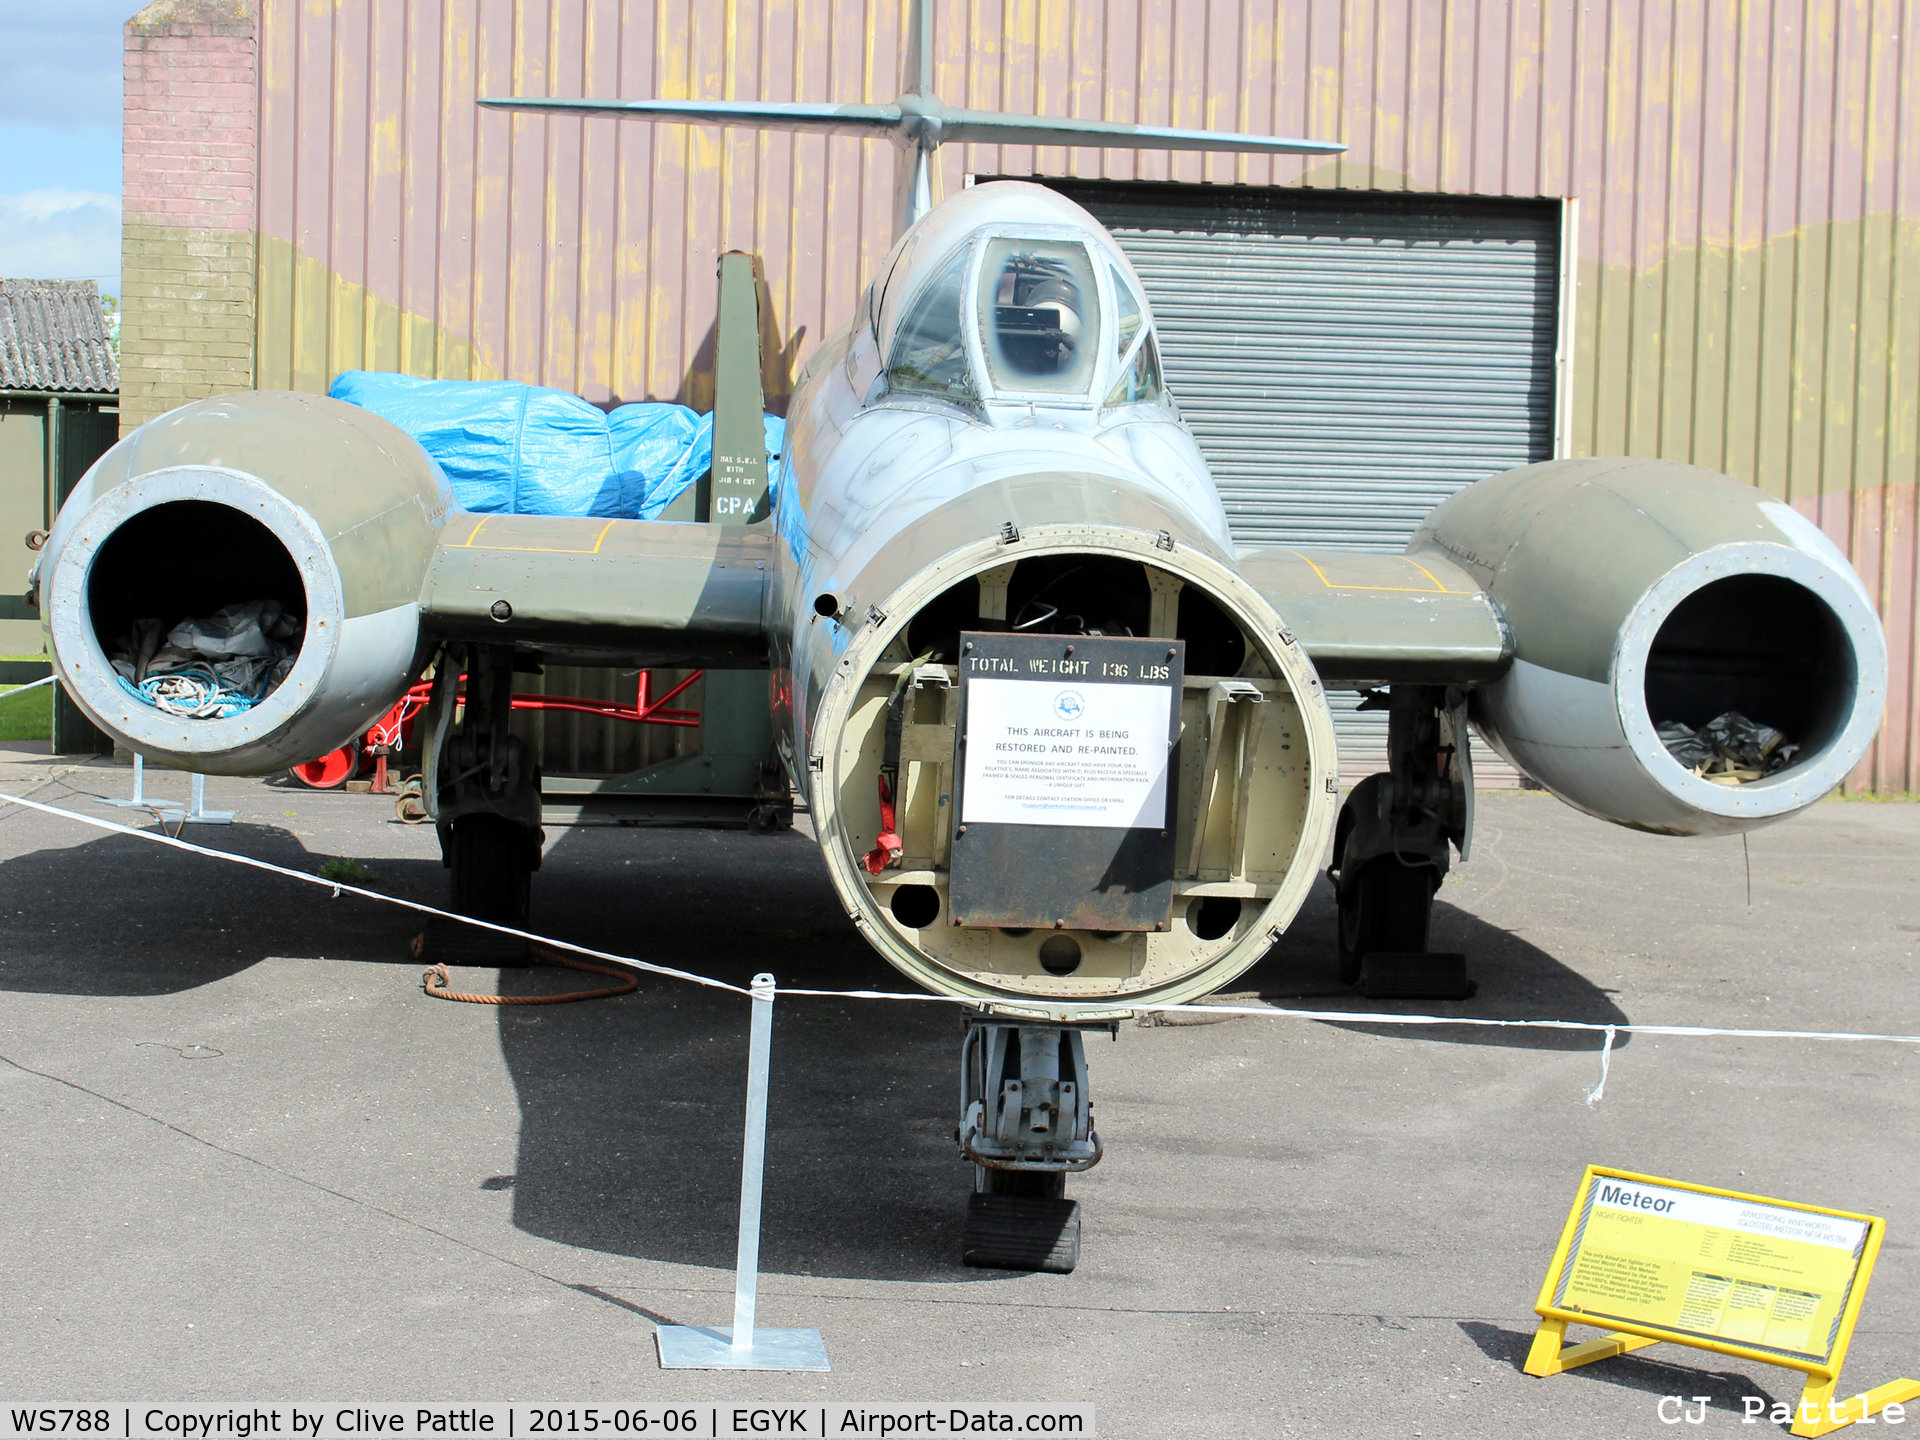 WS788, 1954 Gloster Meteor NF(T).14 C/N Not found WS788, Awaiting restoration at the Yorkshire Air Museum, Elvington, Yorks, UK former EGYK